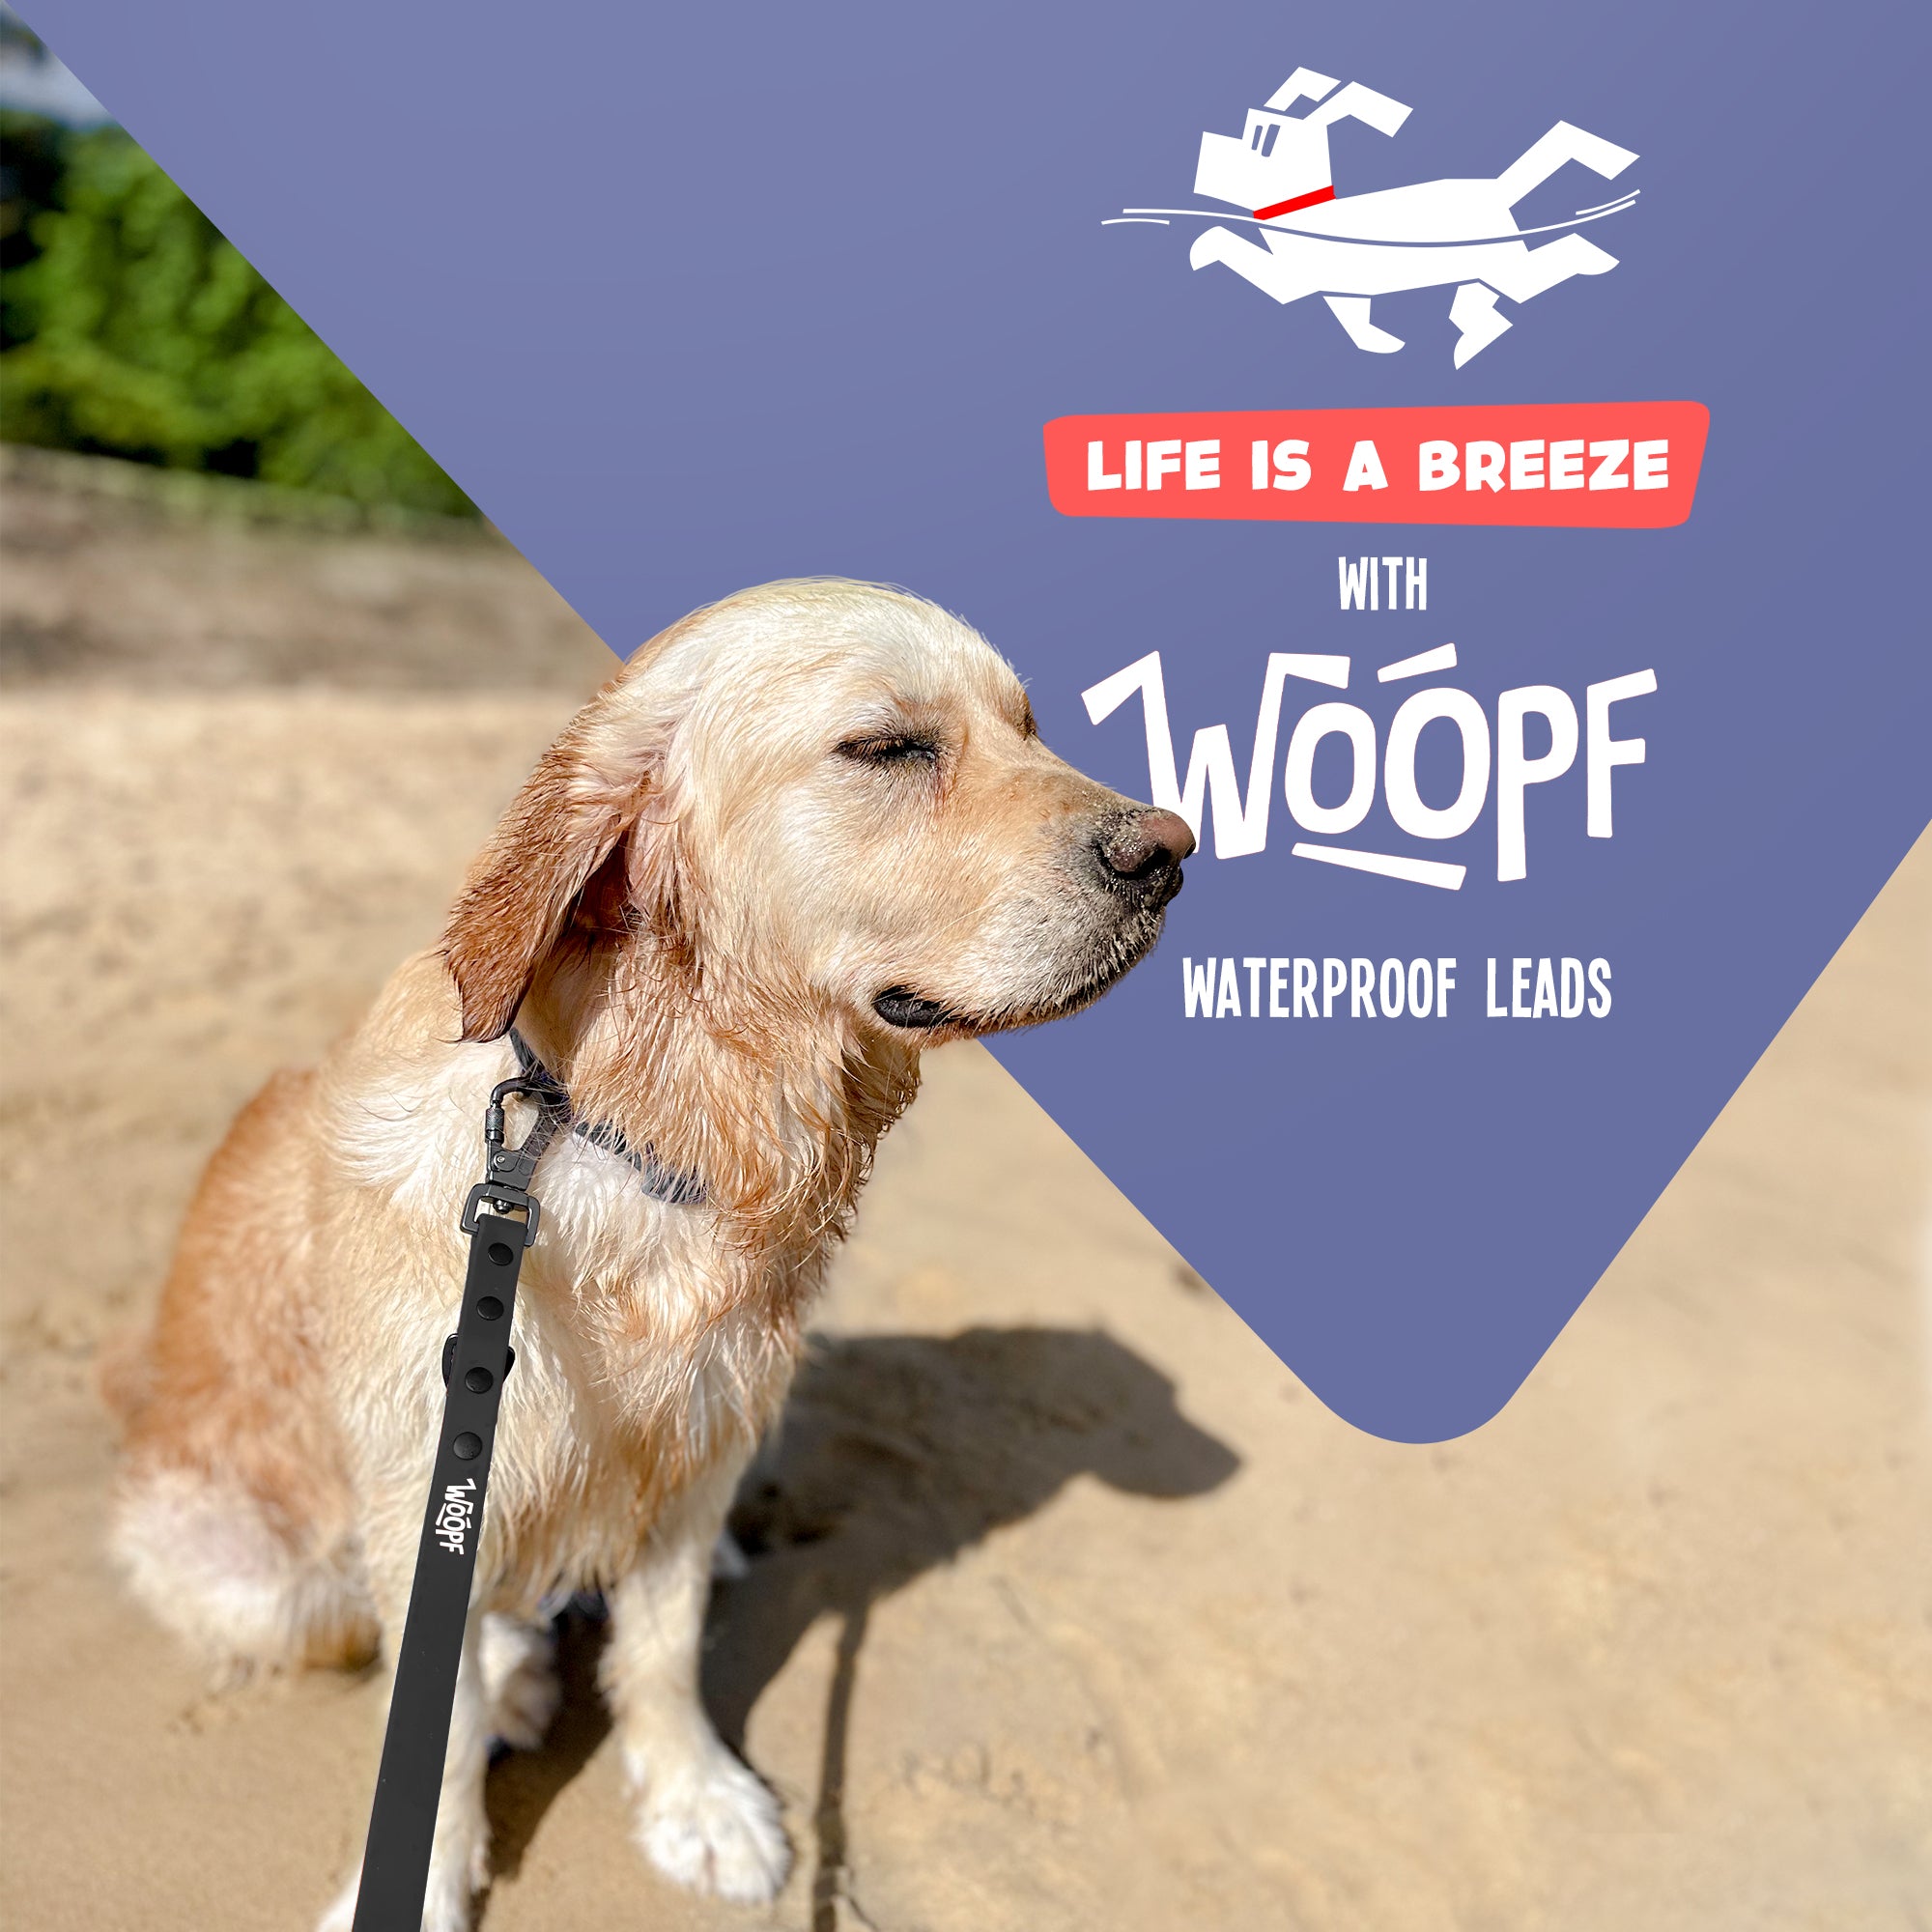 WOOPF Waterproof, All Weather, Strong and Easy to Clean Dog Lead | Small, Medium, and Large Dogs (Grey)